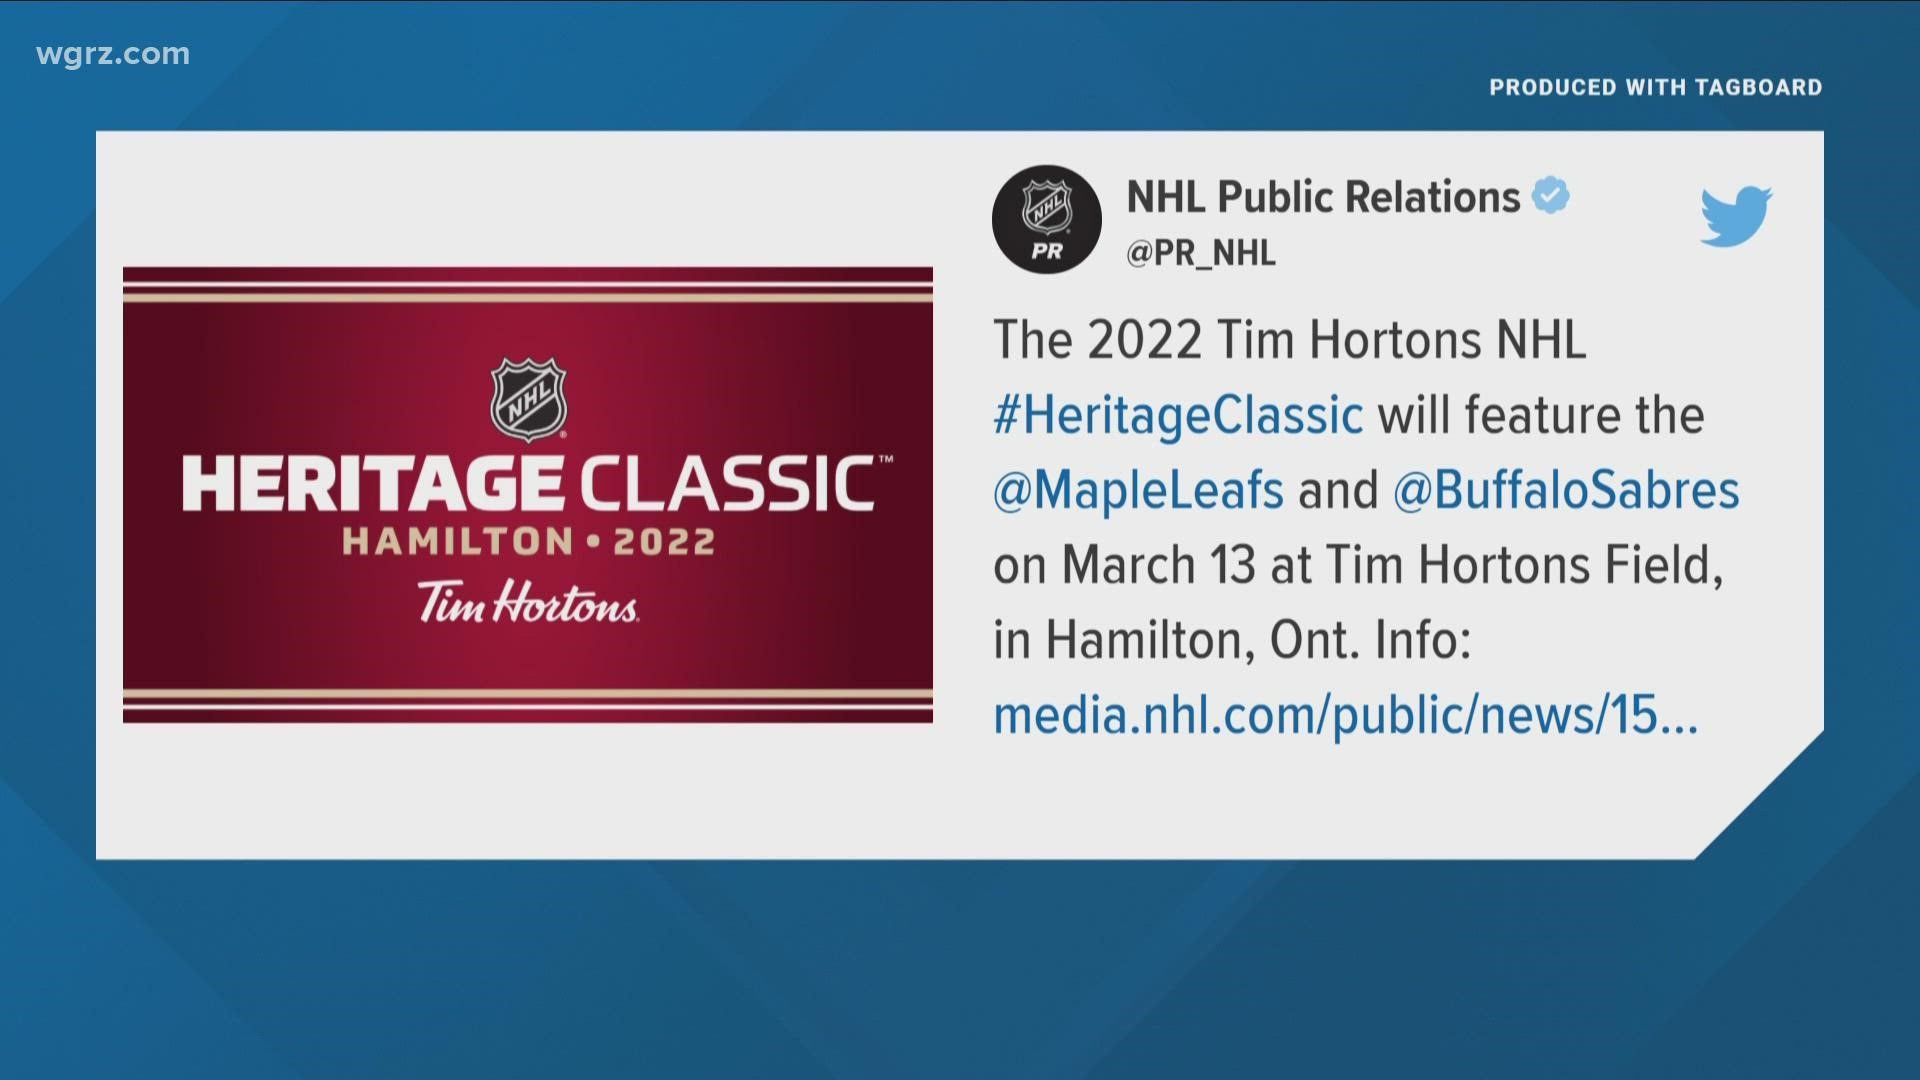 Sabres will play the Leafs March 13, 2022 in Hamilton, Ontario